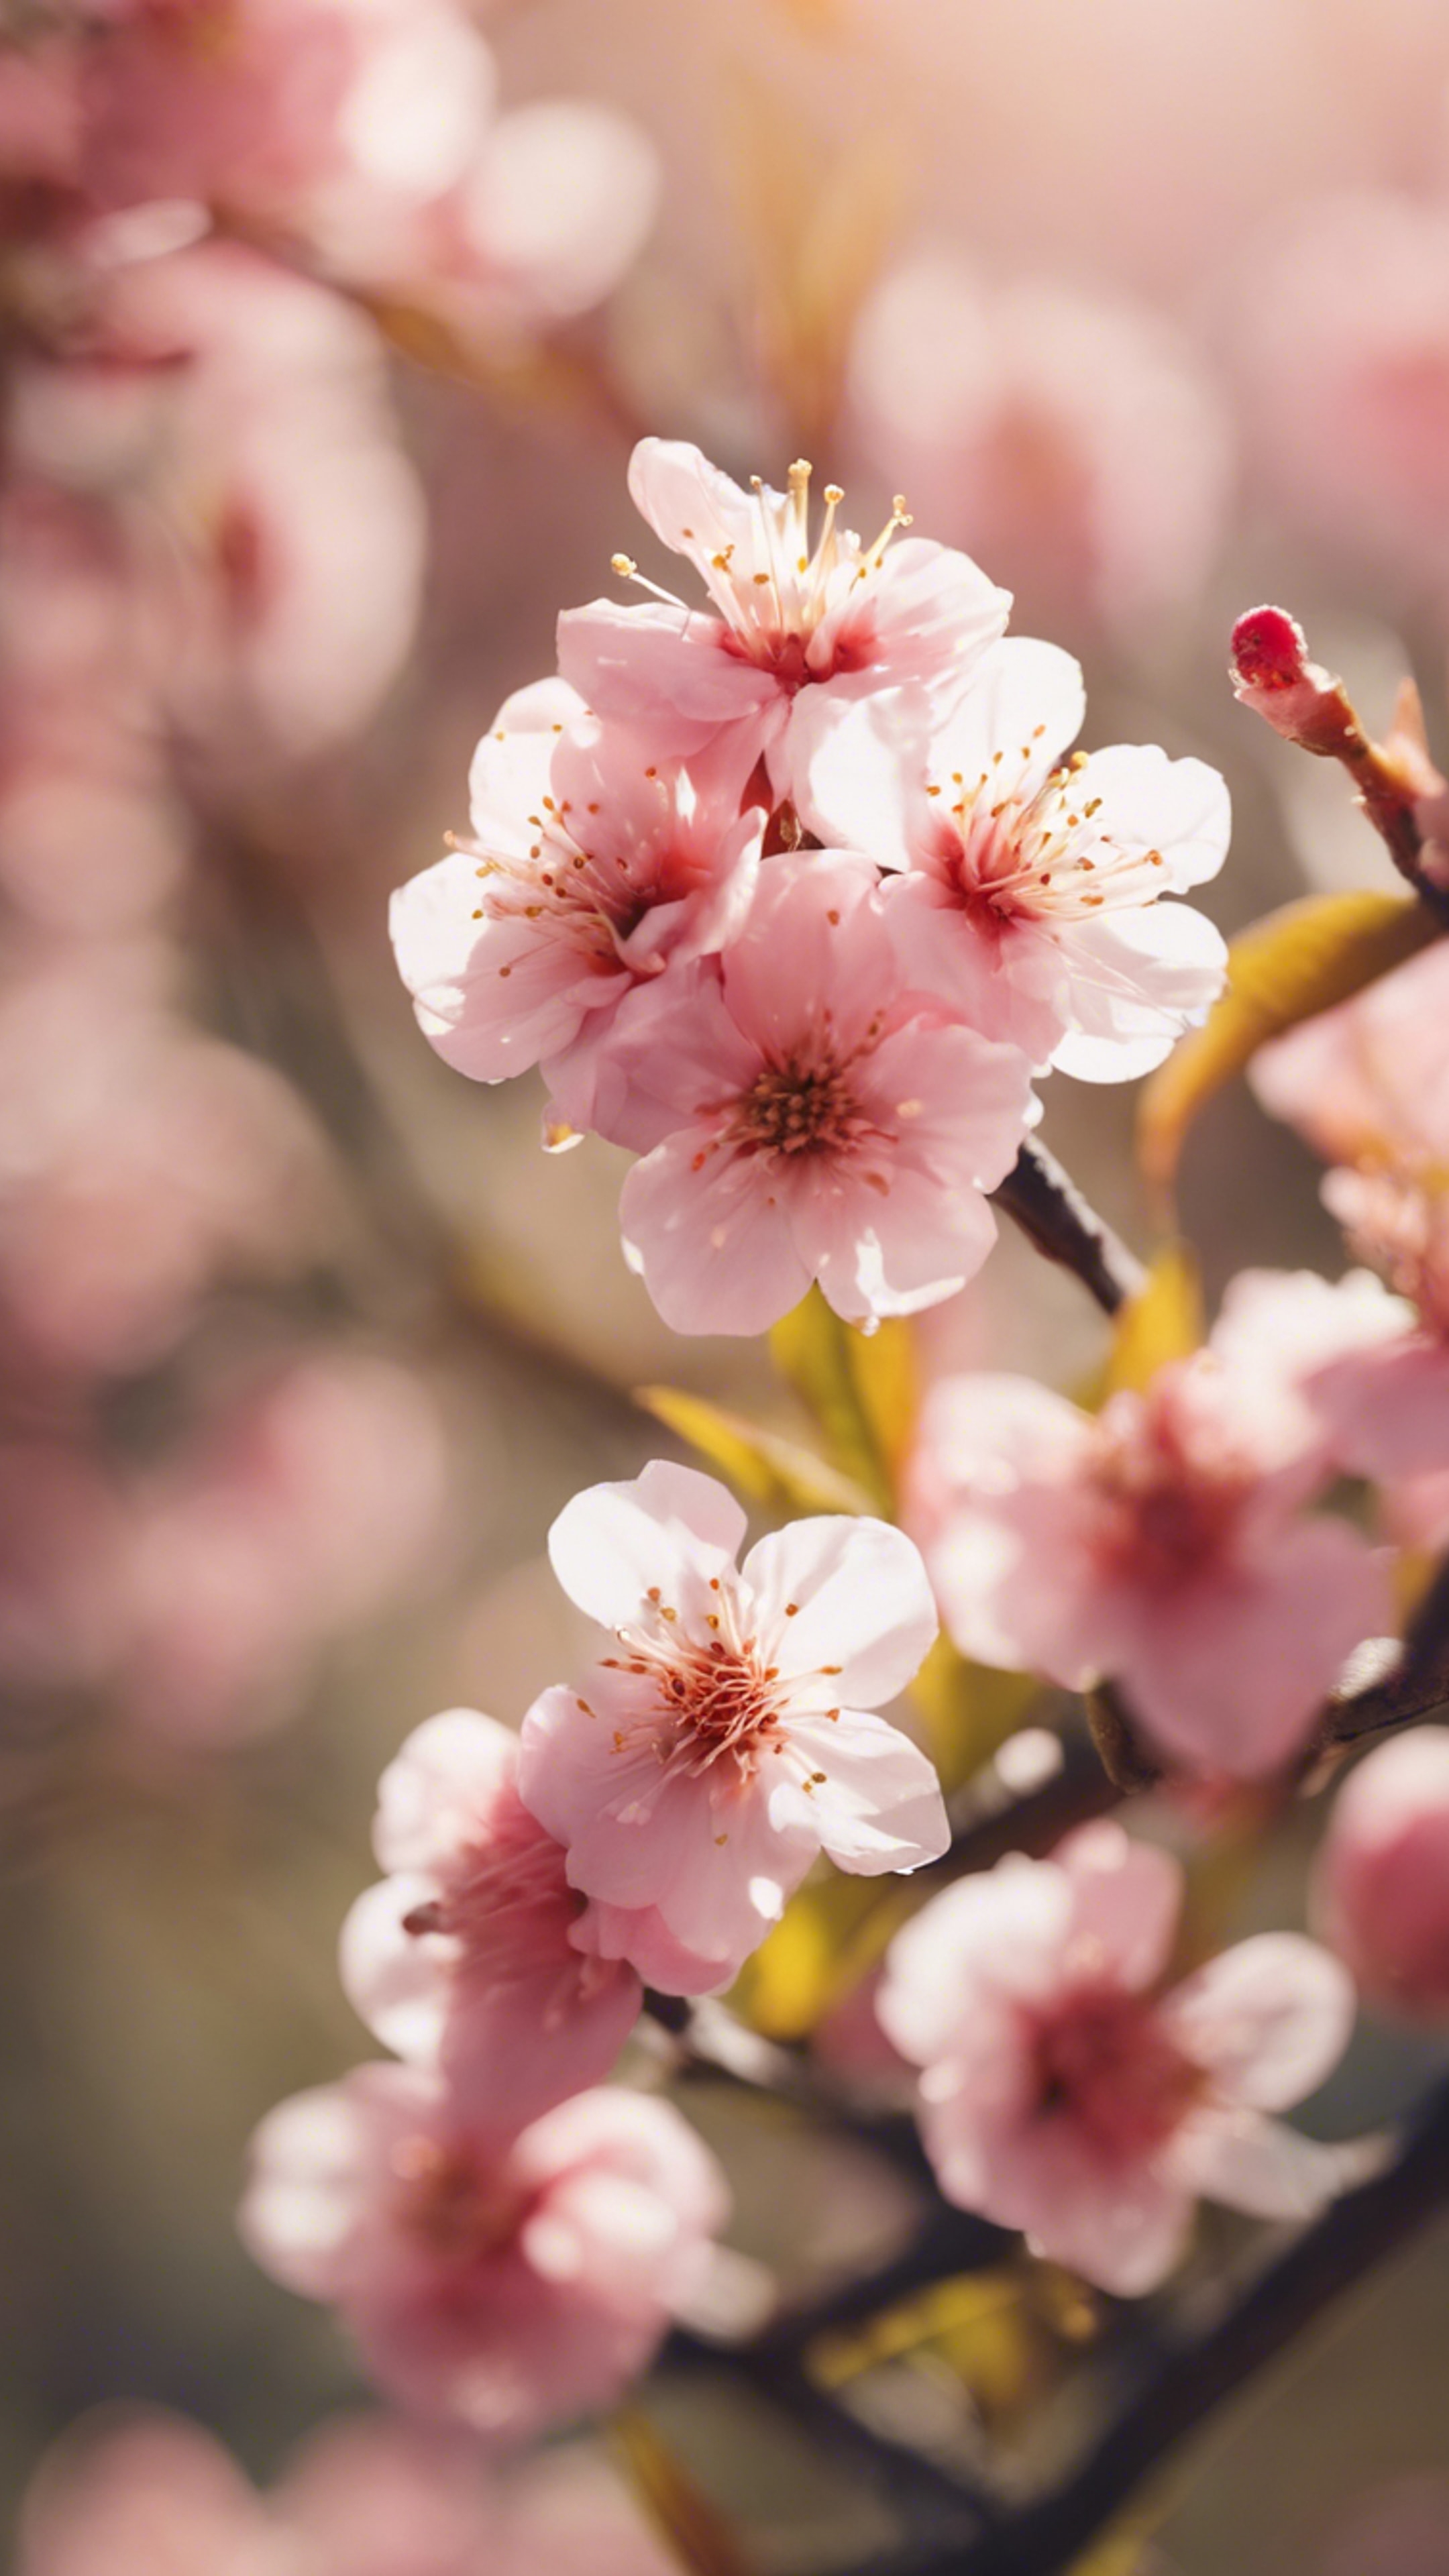 A close-up of happy peach flowers blooming cheerfully on a sunny spring day. Hintergrund[9ab03d009b524efe8bfb]